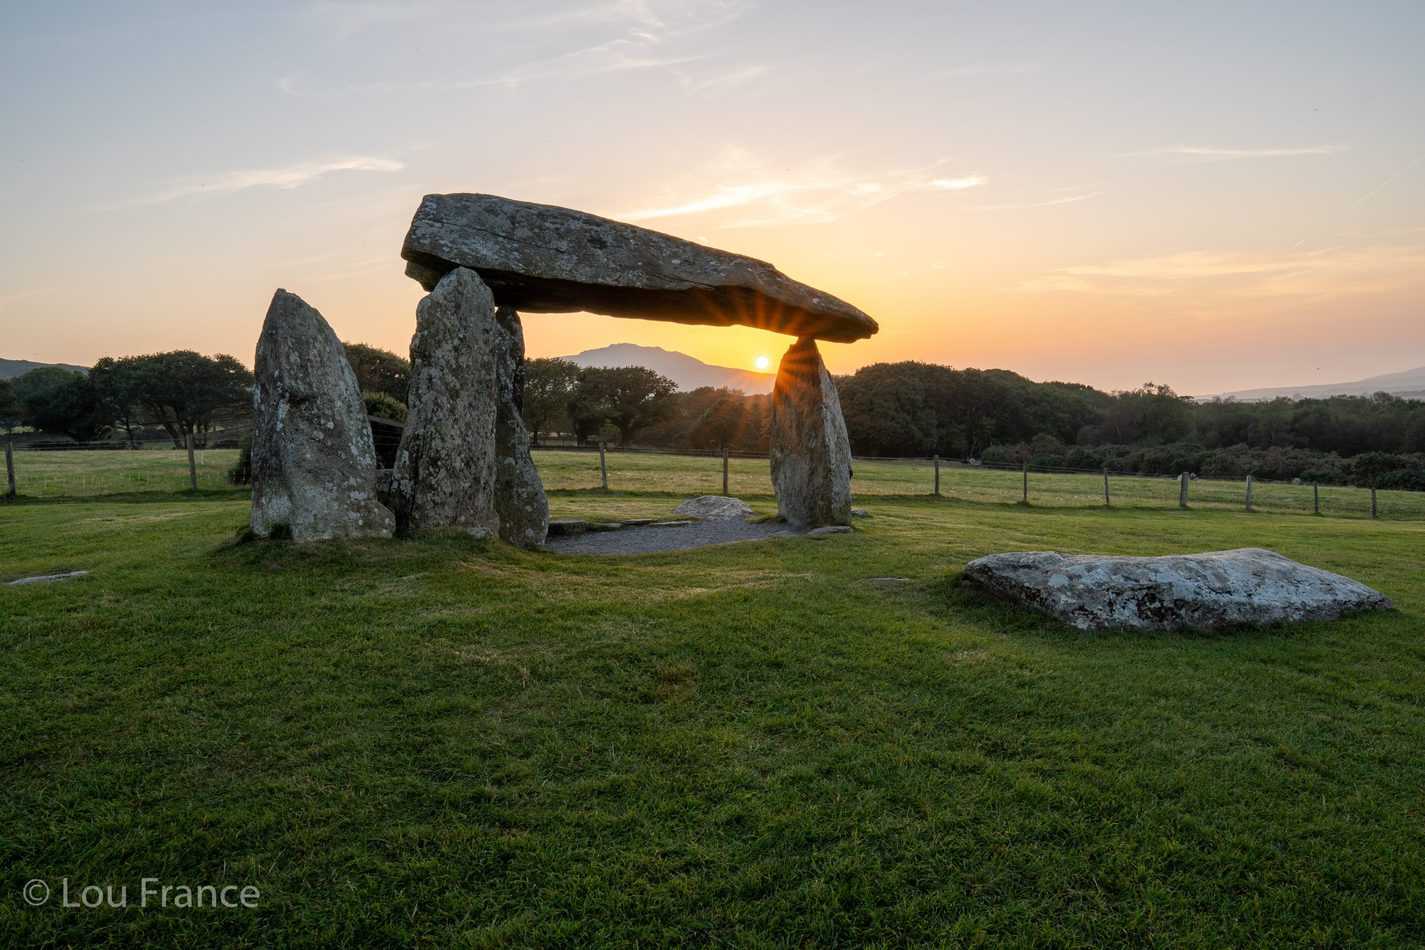 Pentre Ifan is a unique stop on a road trip in Wales